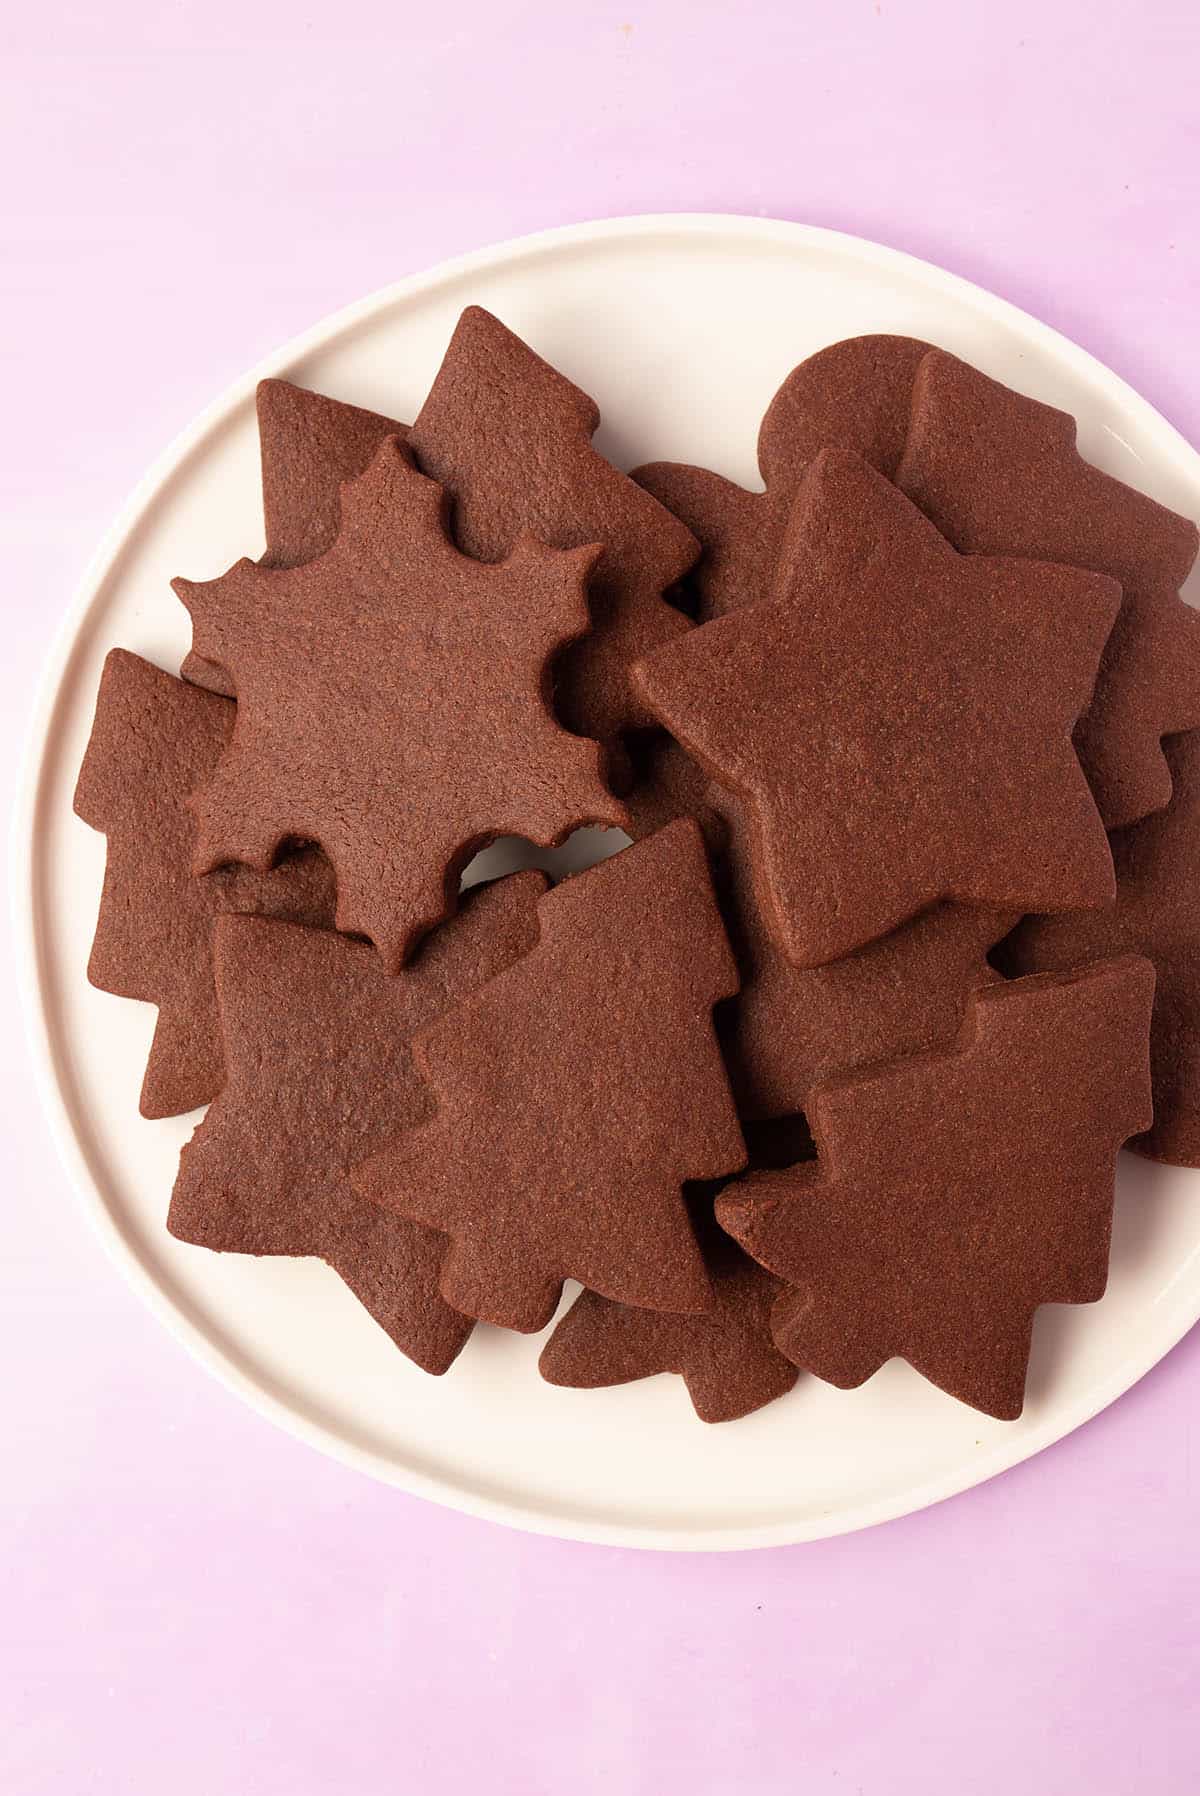 Top view of a white plate filled with chocolate cut-out cookies.